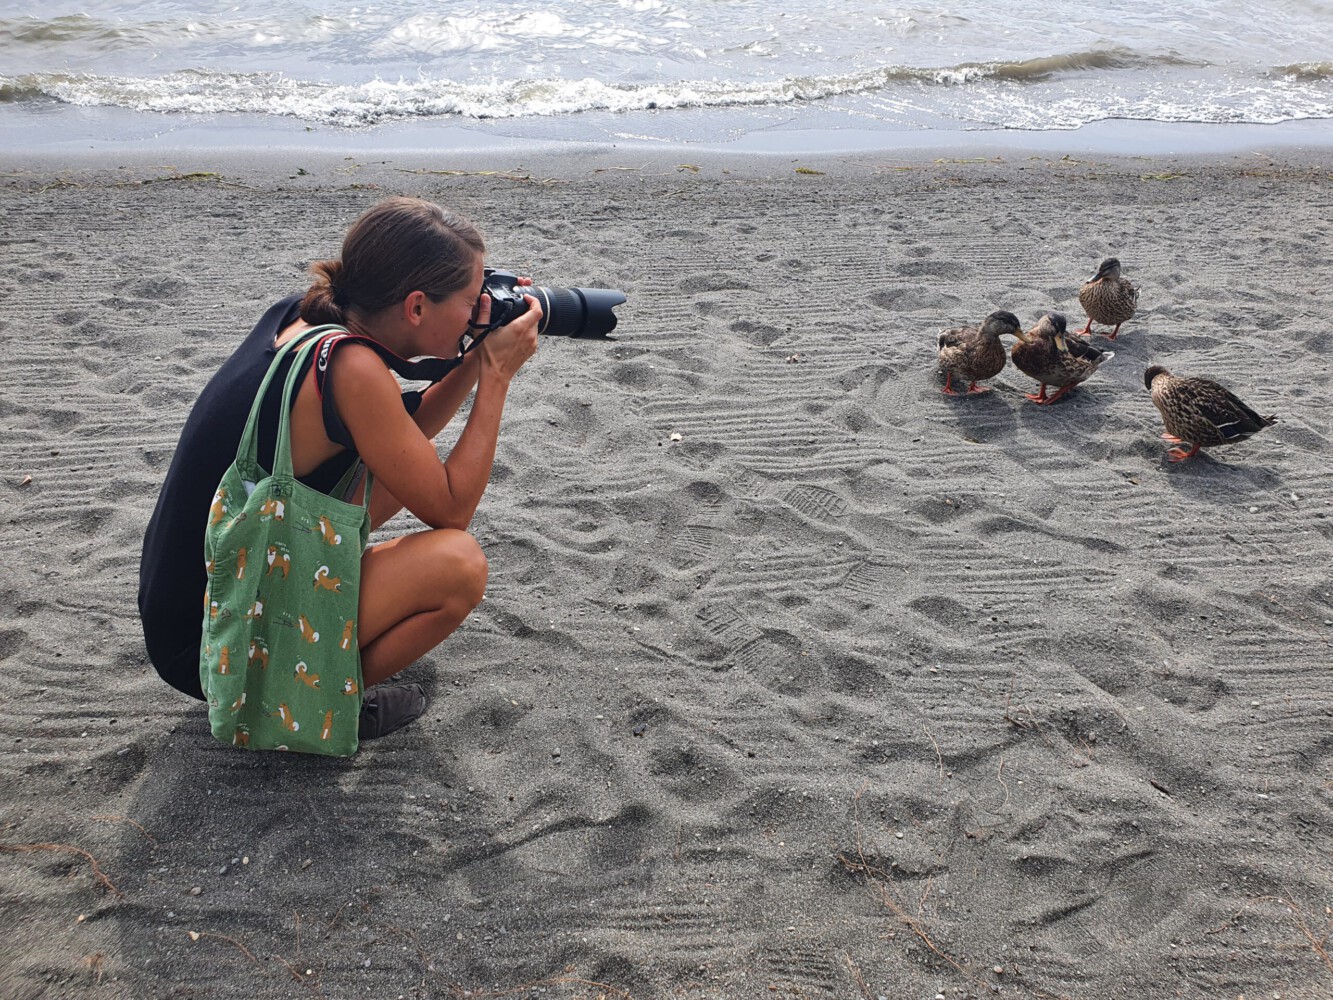 Alina taking photos from the curious ducks.